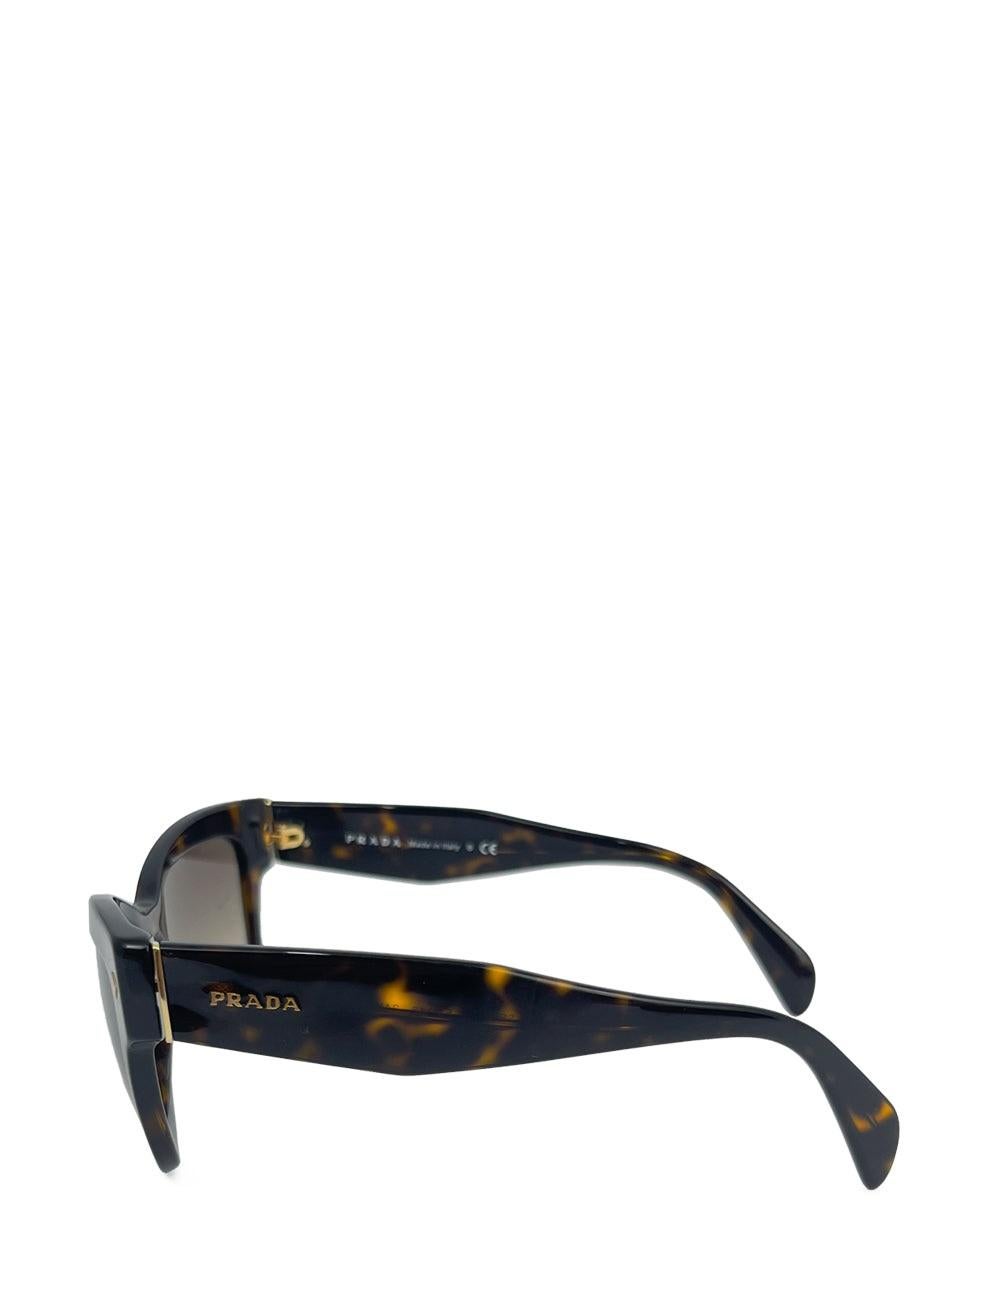 Prada tortoise shell acetate-frame square sunglasses

Additional information:
Hardware: Acetate
Lens: Black
Size: 51/18/140
Overall condition: Excellent
Includes original box
